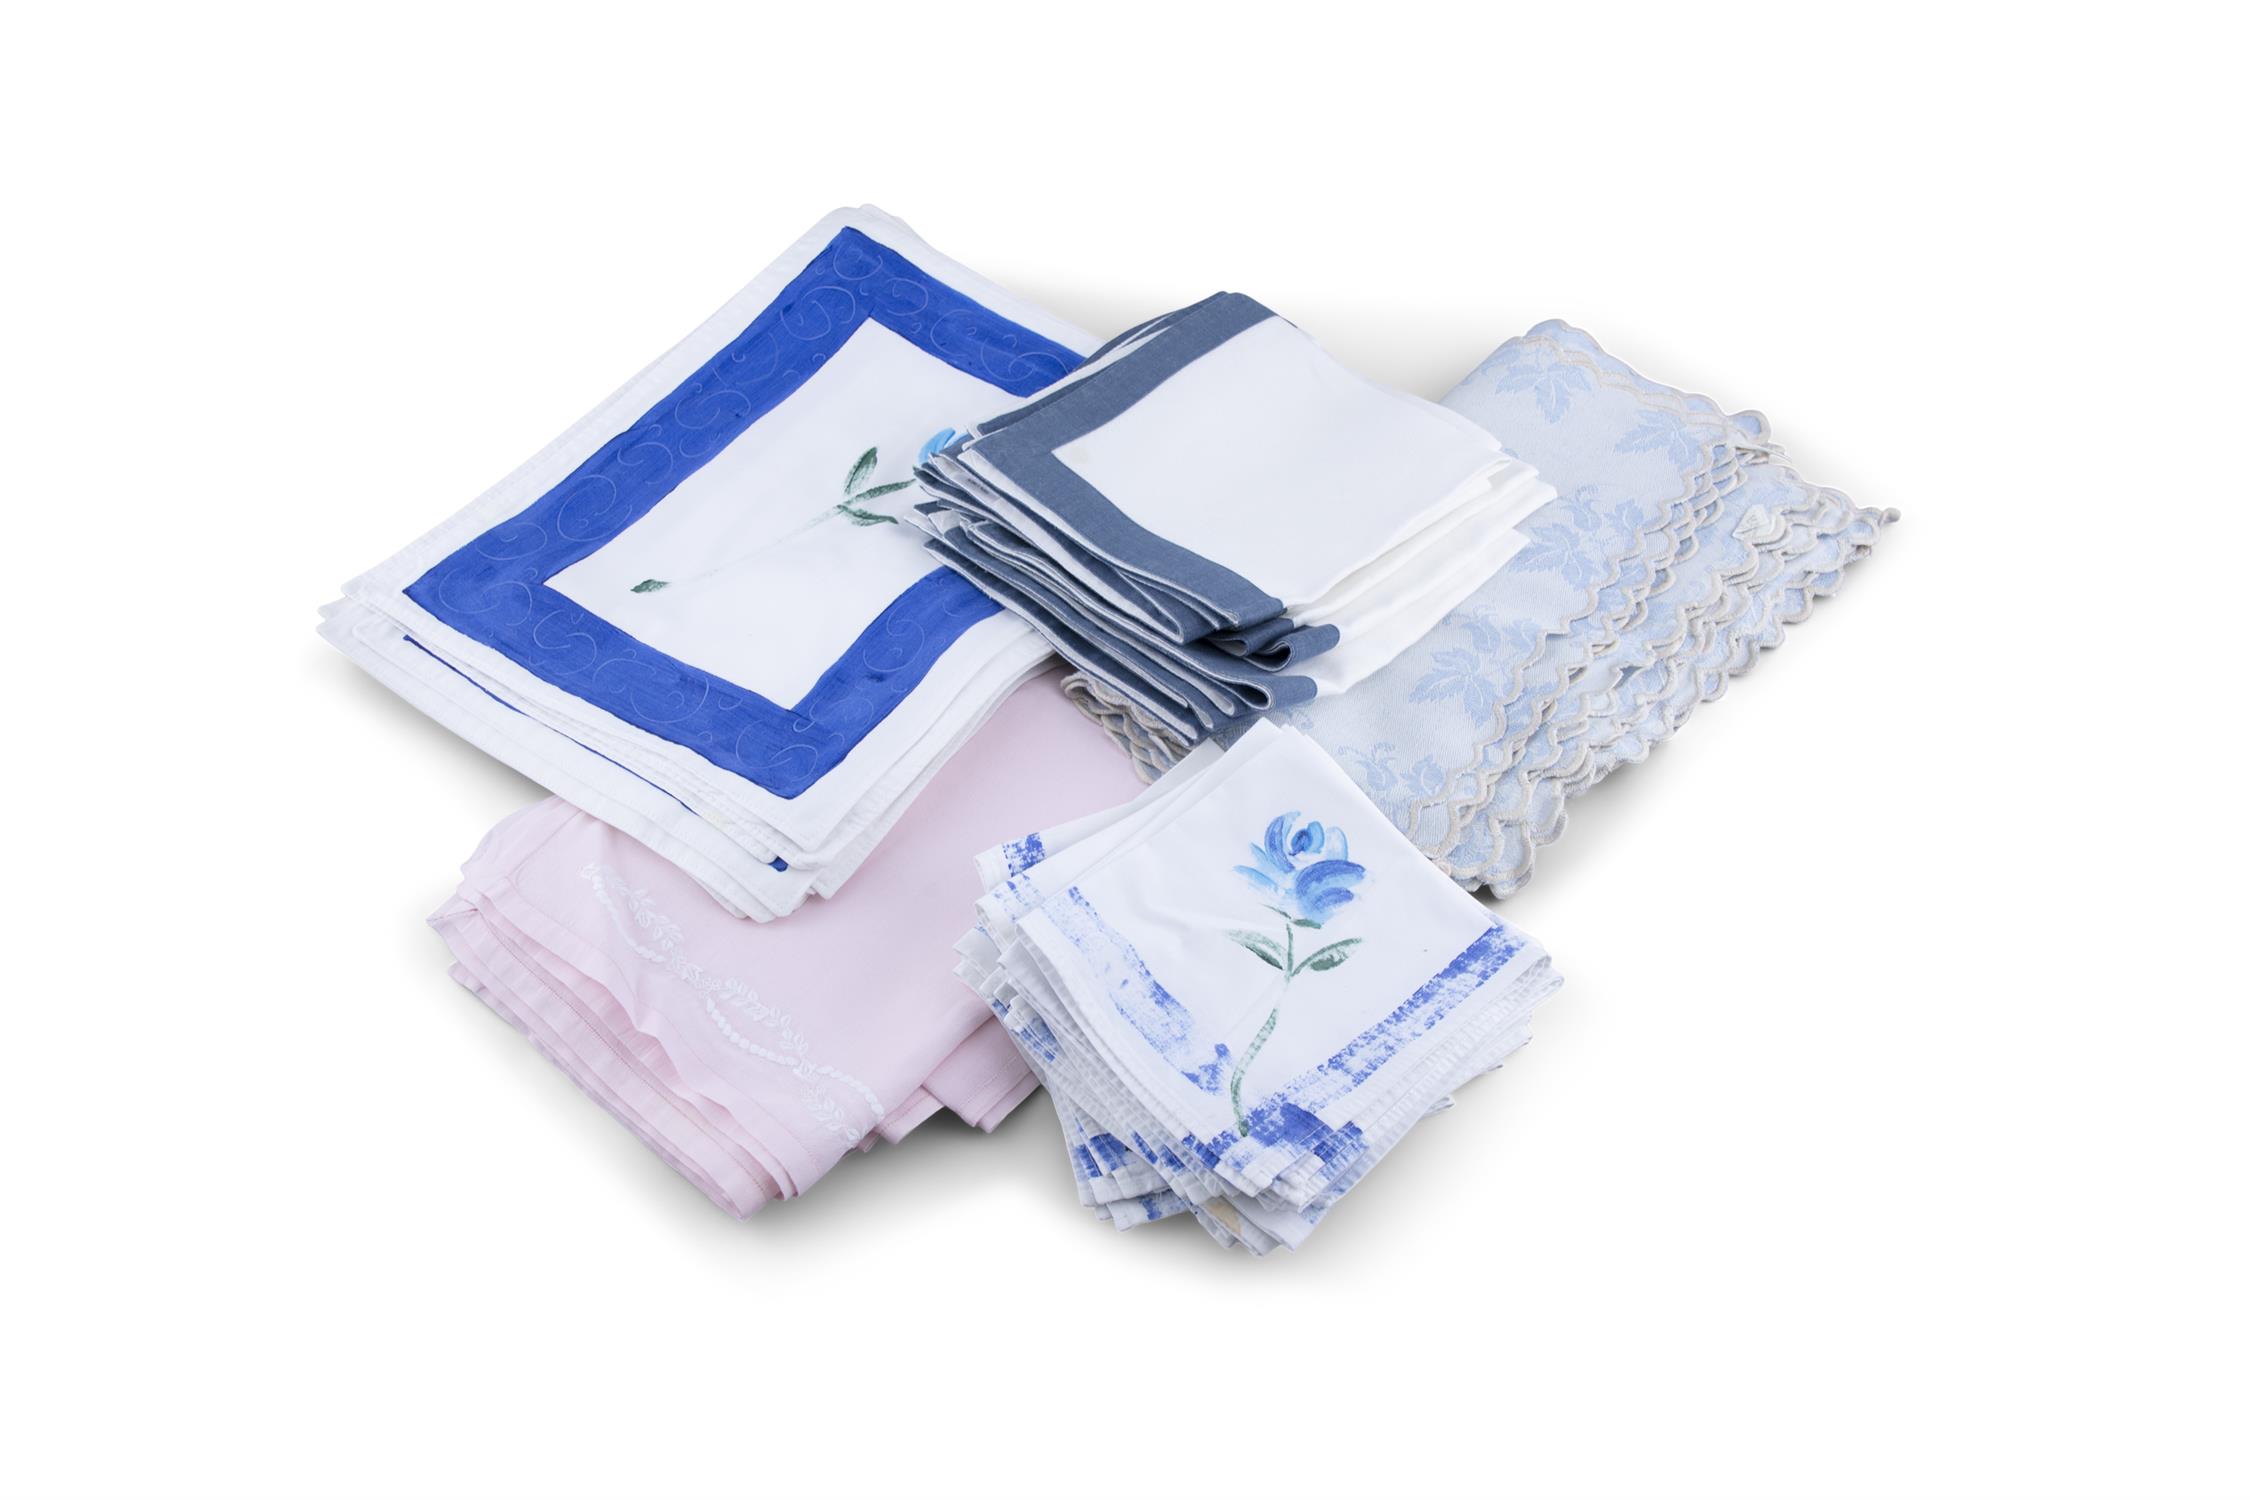 A COLLECTION OF BLUE AND WHITE TABLE LINENS, mats and matching napkins some with printed floral